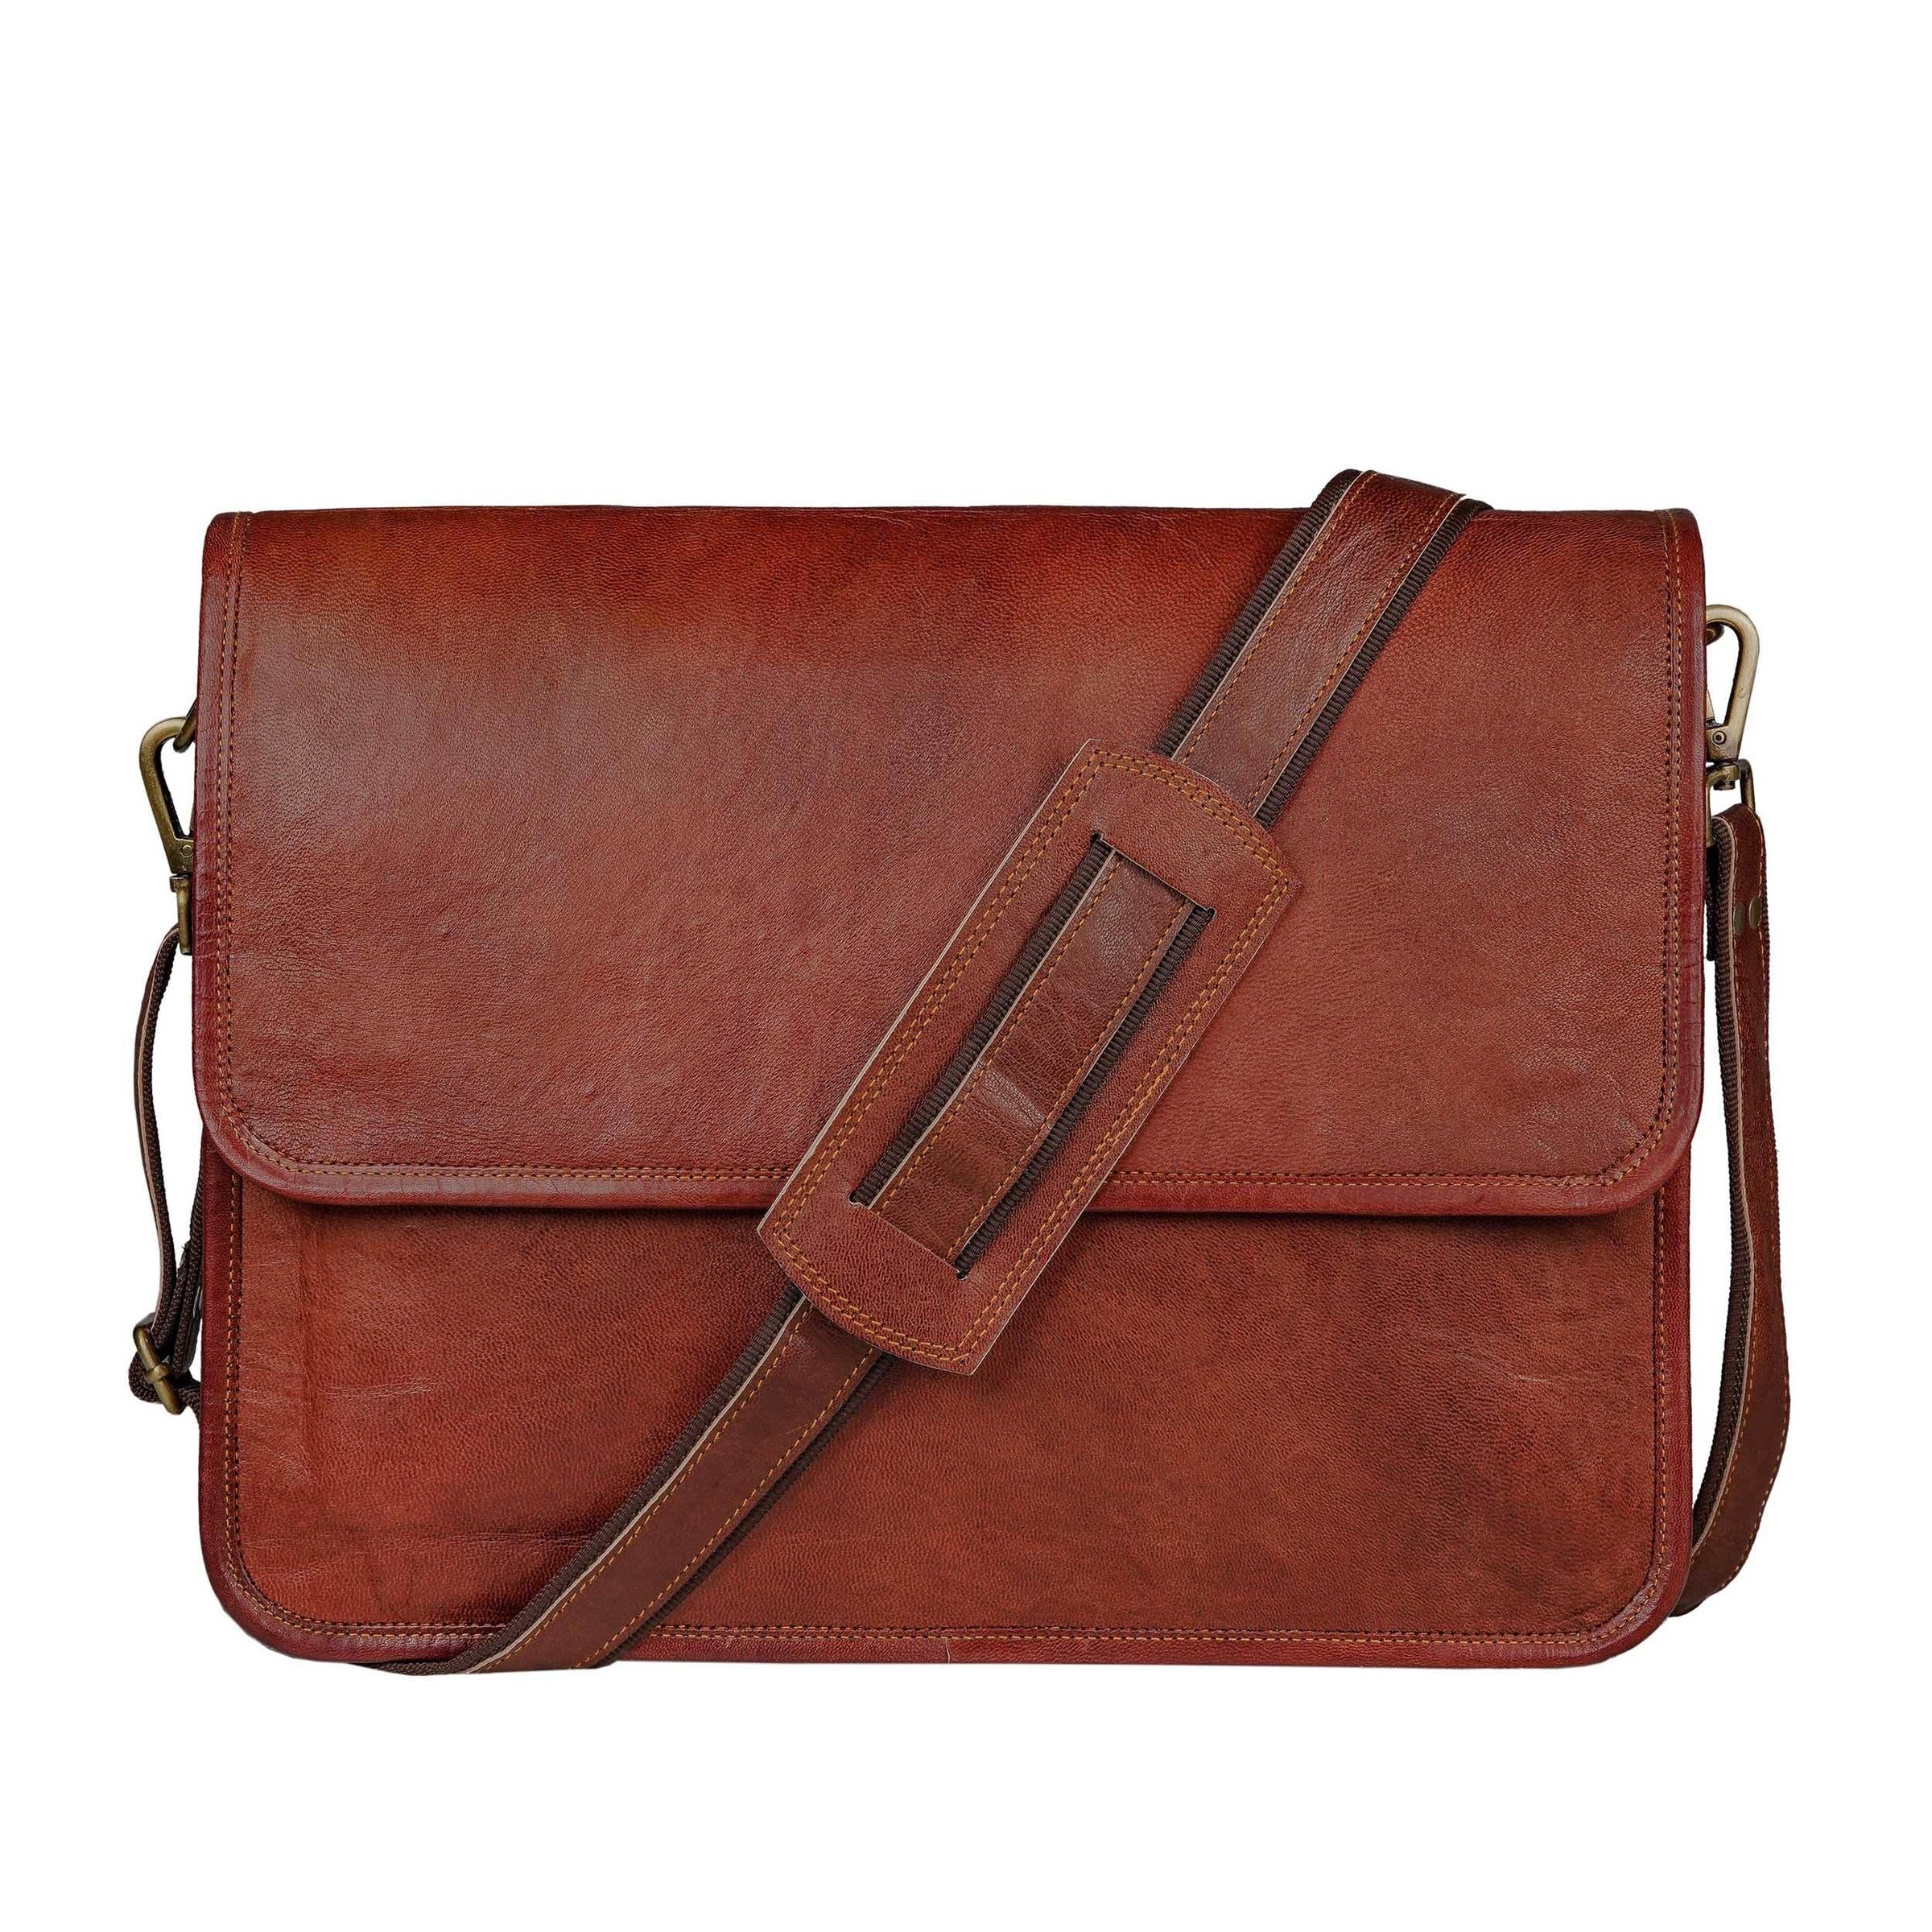  leather messenger bag with flap